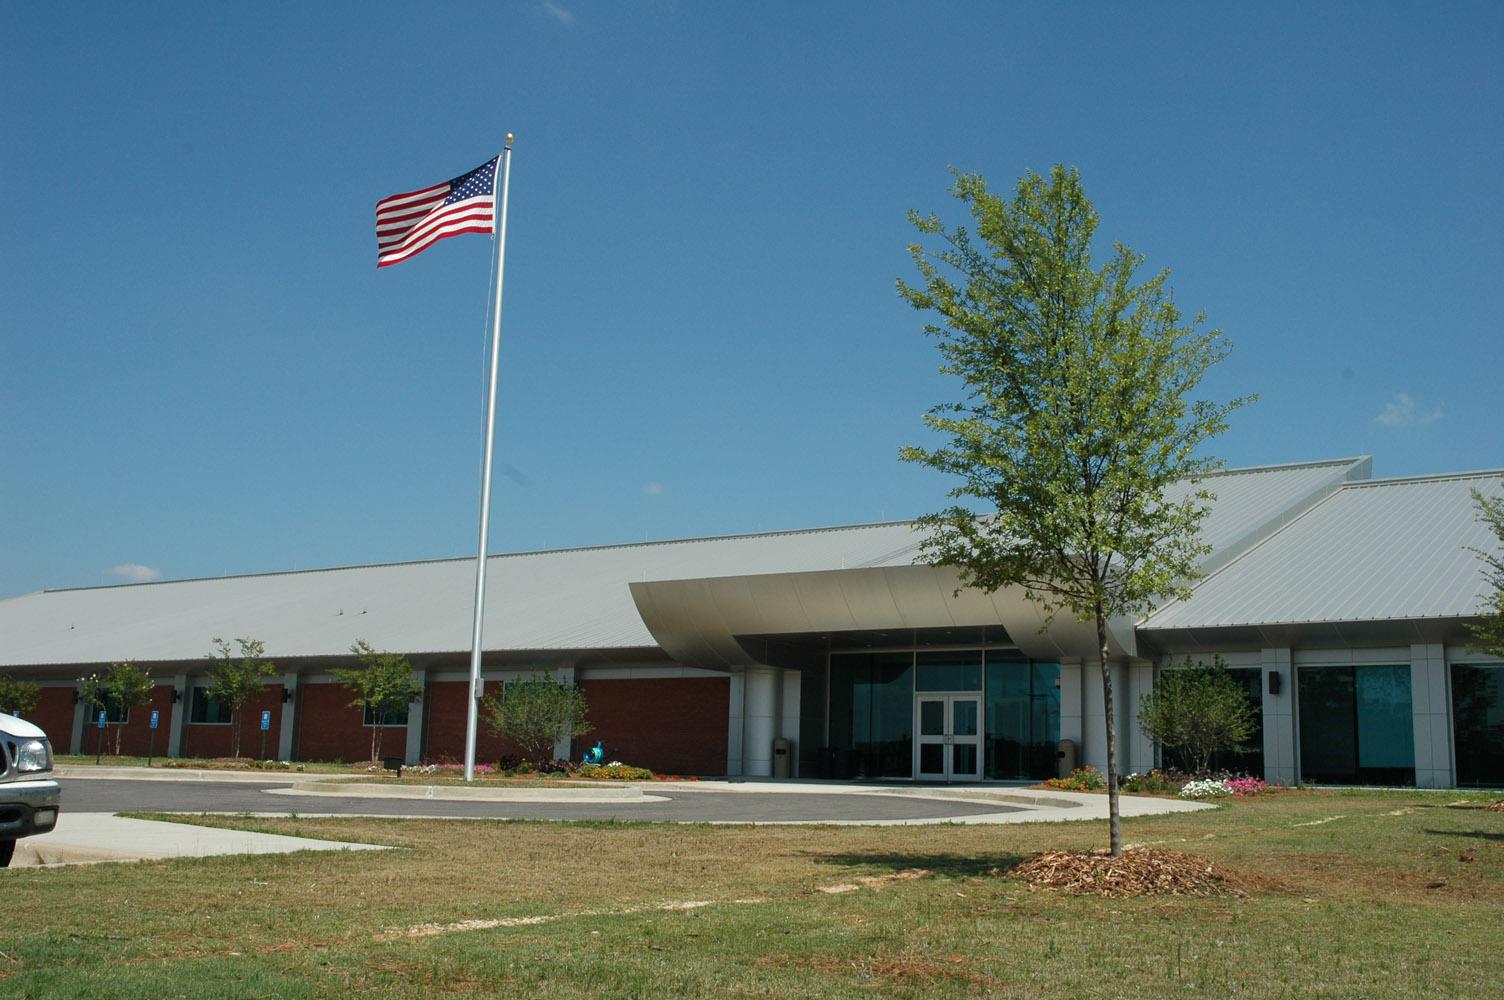 U.S. Department of Agriculture horticulture laboratory in Poplarville